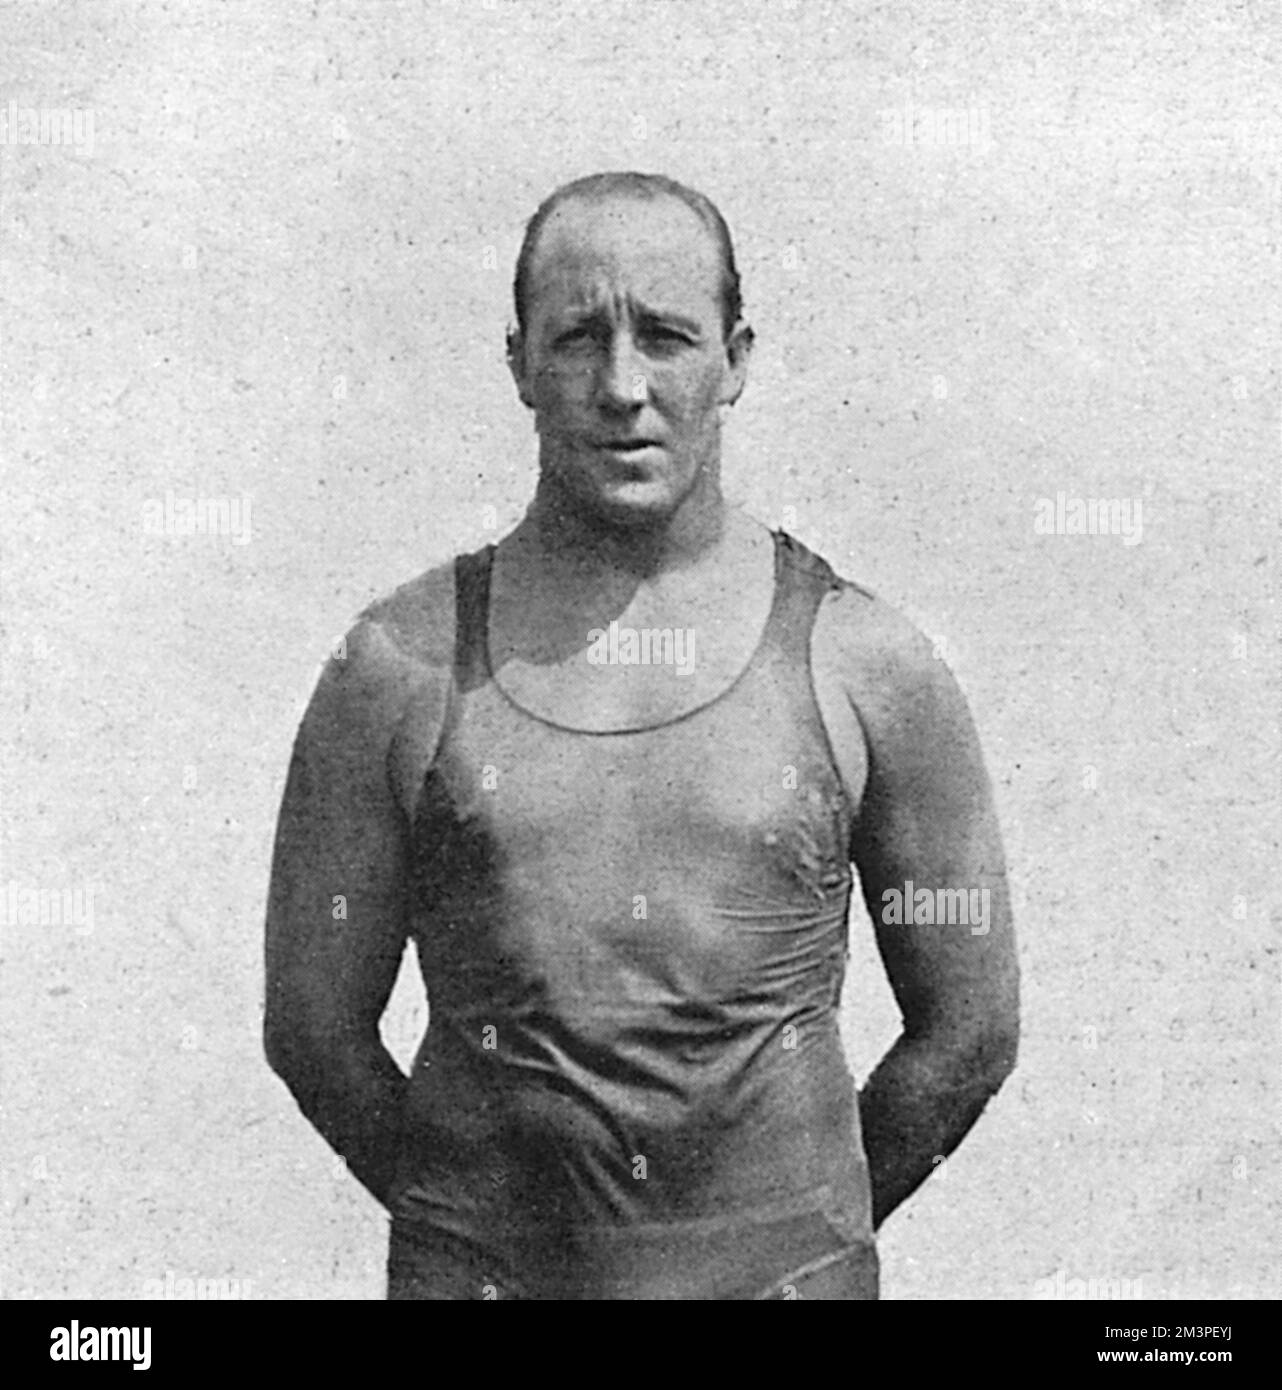 Cecil Patrick Healy (28 November 1881  29 August 1918) Australian freestyle swimmer of the 1900s and 1910s, who won silver in the 100 m freestyle at the 1912 Summer Olympics in Stockholm. He also won gold in the 4 &#x5e0;200 m freestyle relay. He was killed in the First World War at the Somme during an attack on a German trench.  1918 Stock Photo